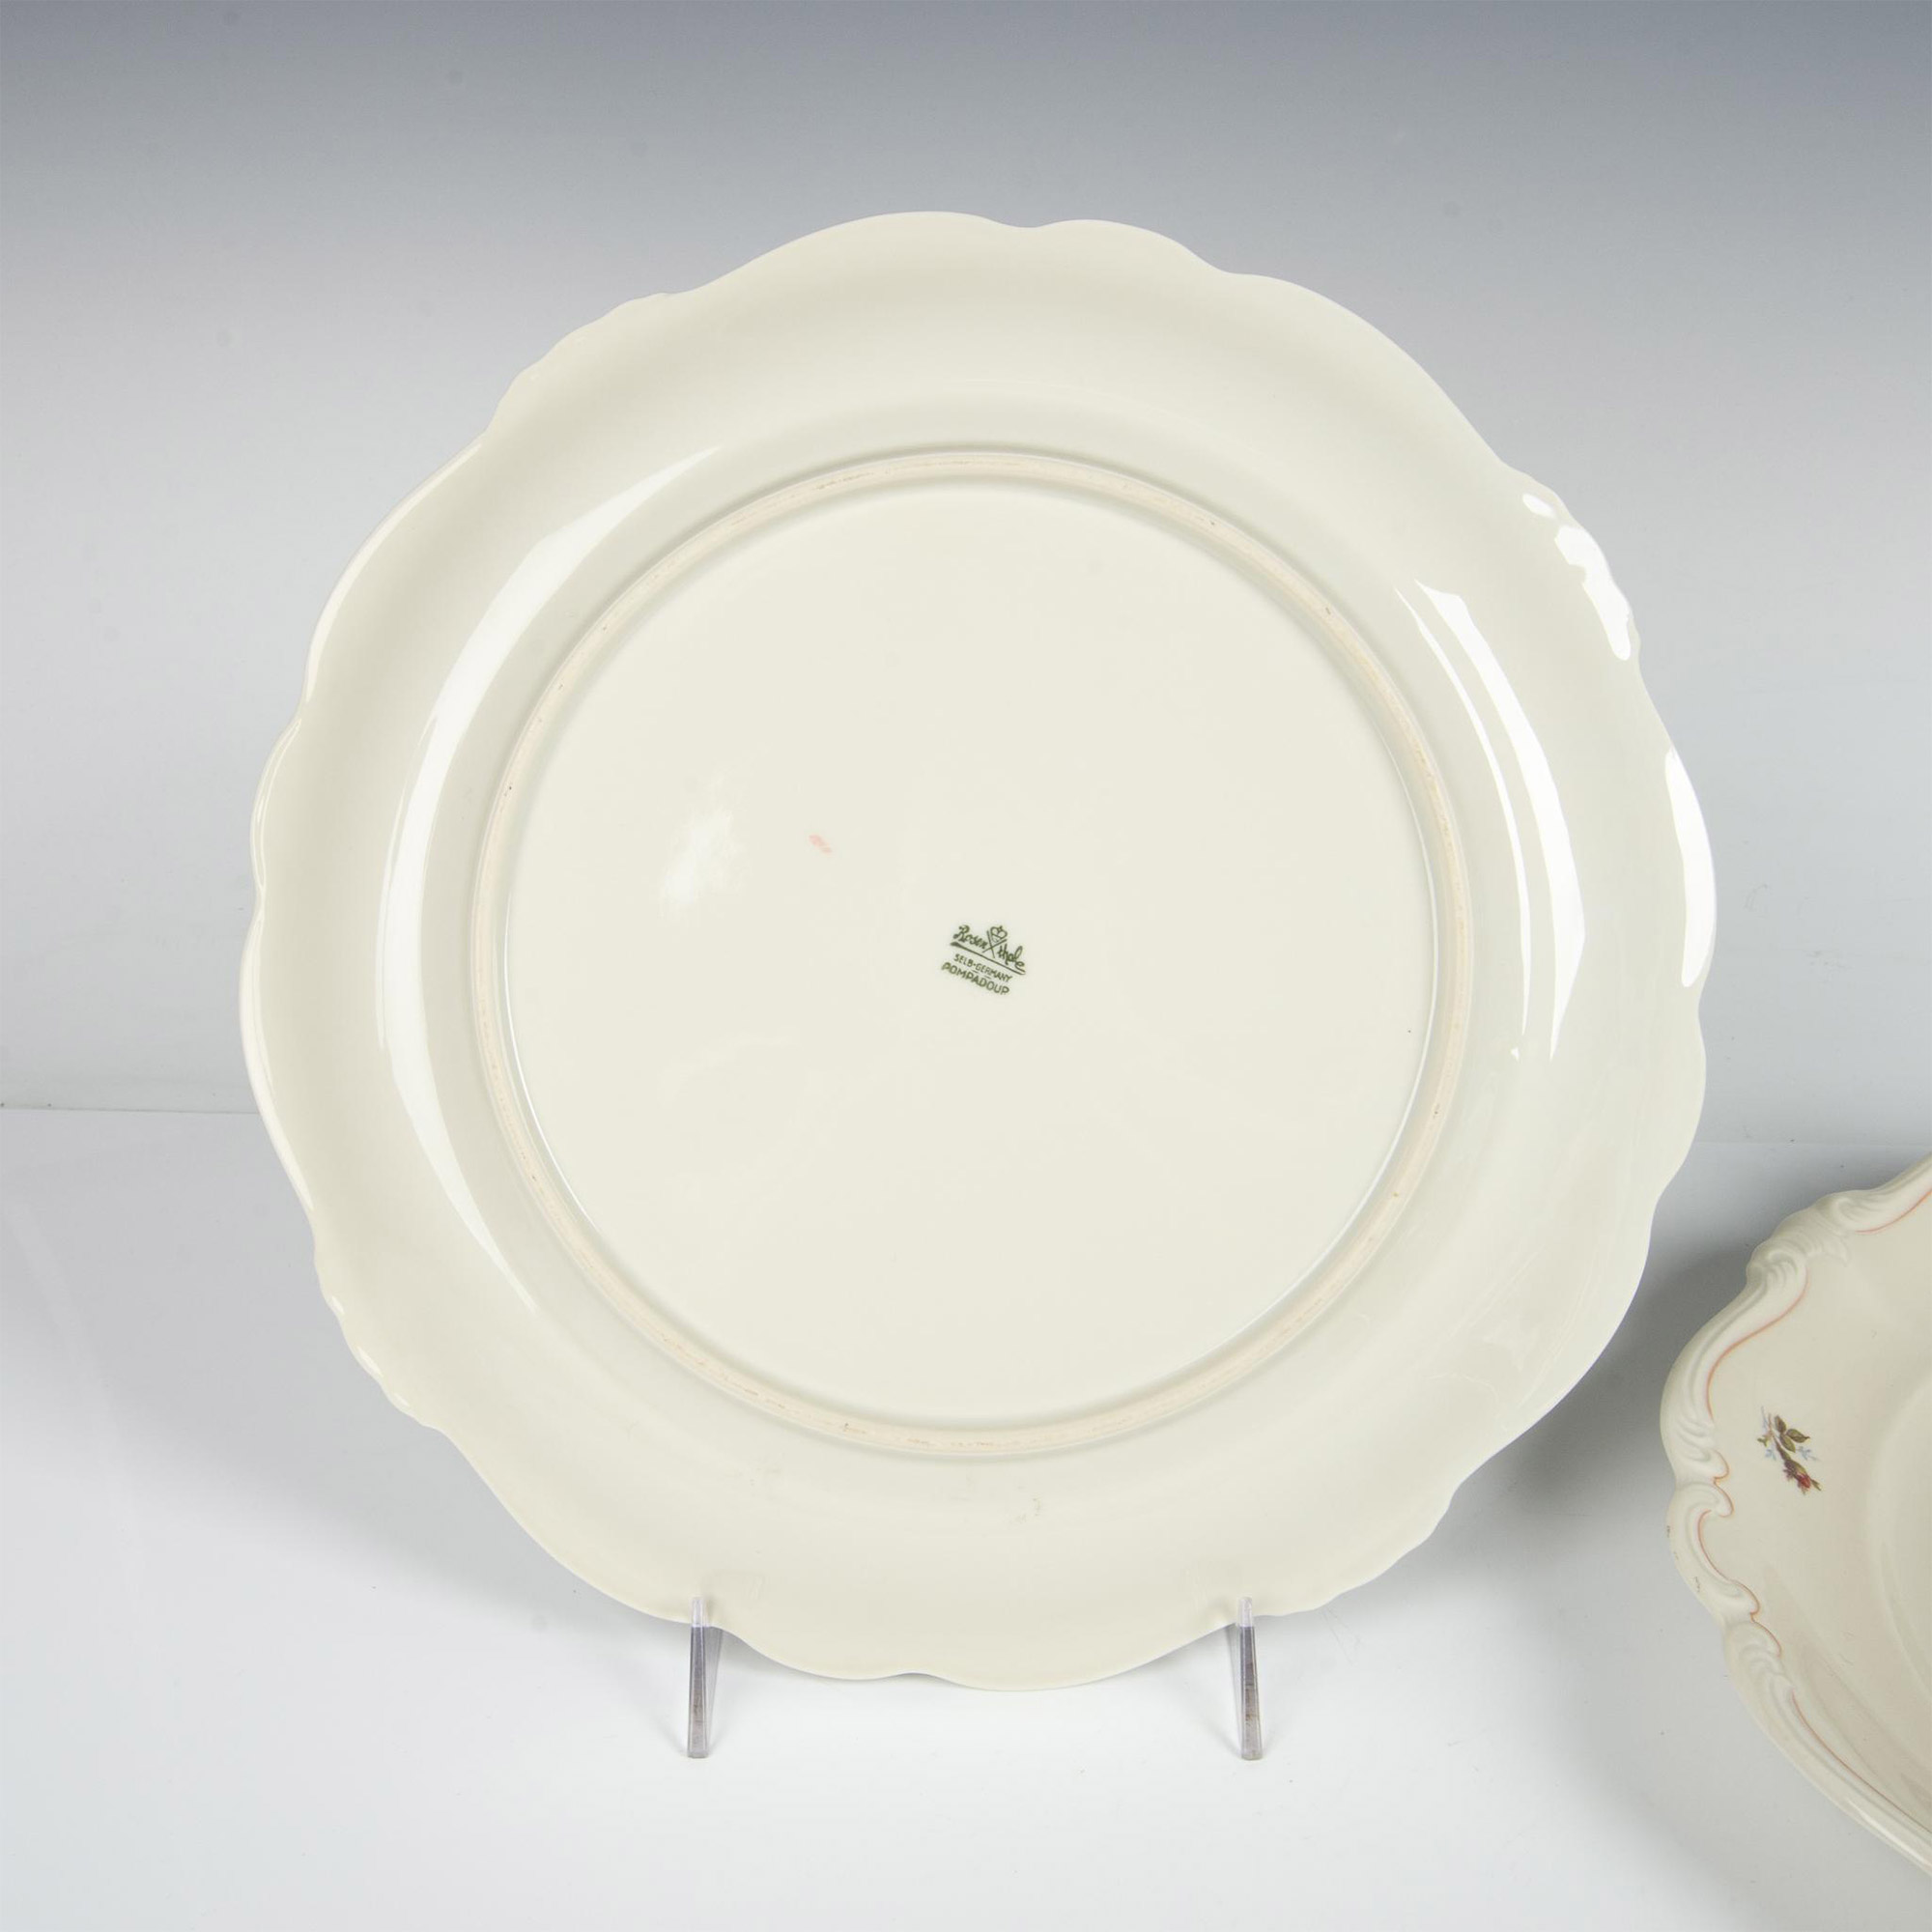 2 Rosenthal Selb-Germany Pompadour Moss Rose Charger Plates - Image 3 of 4